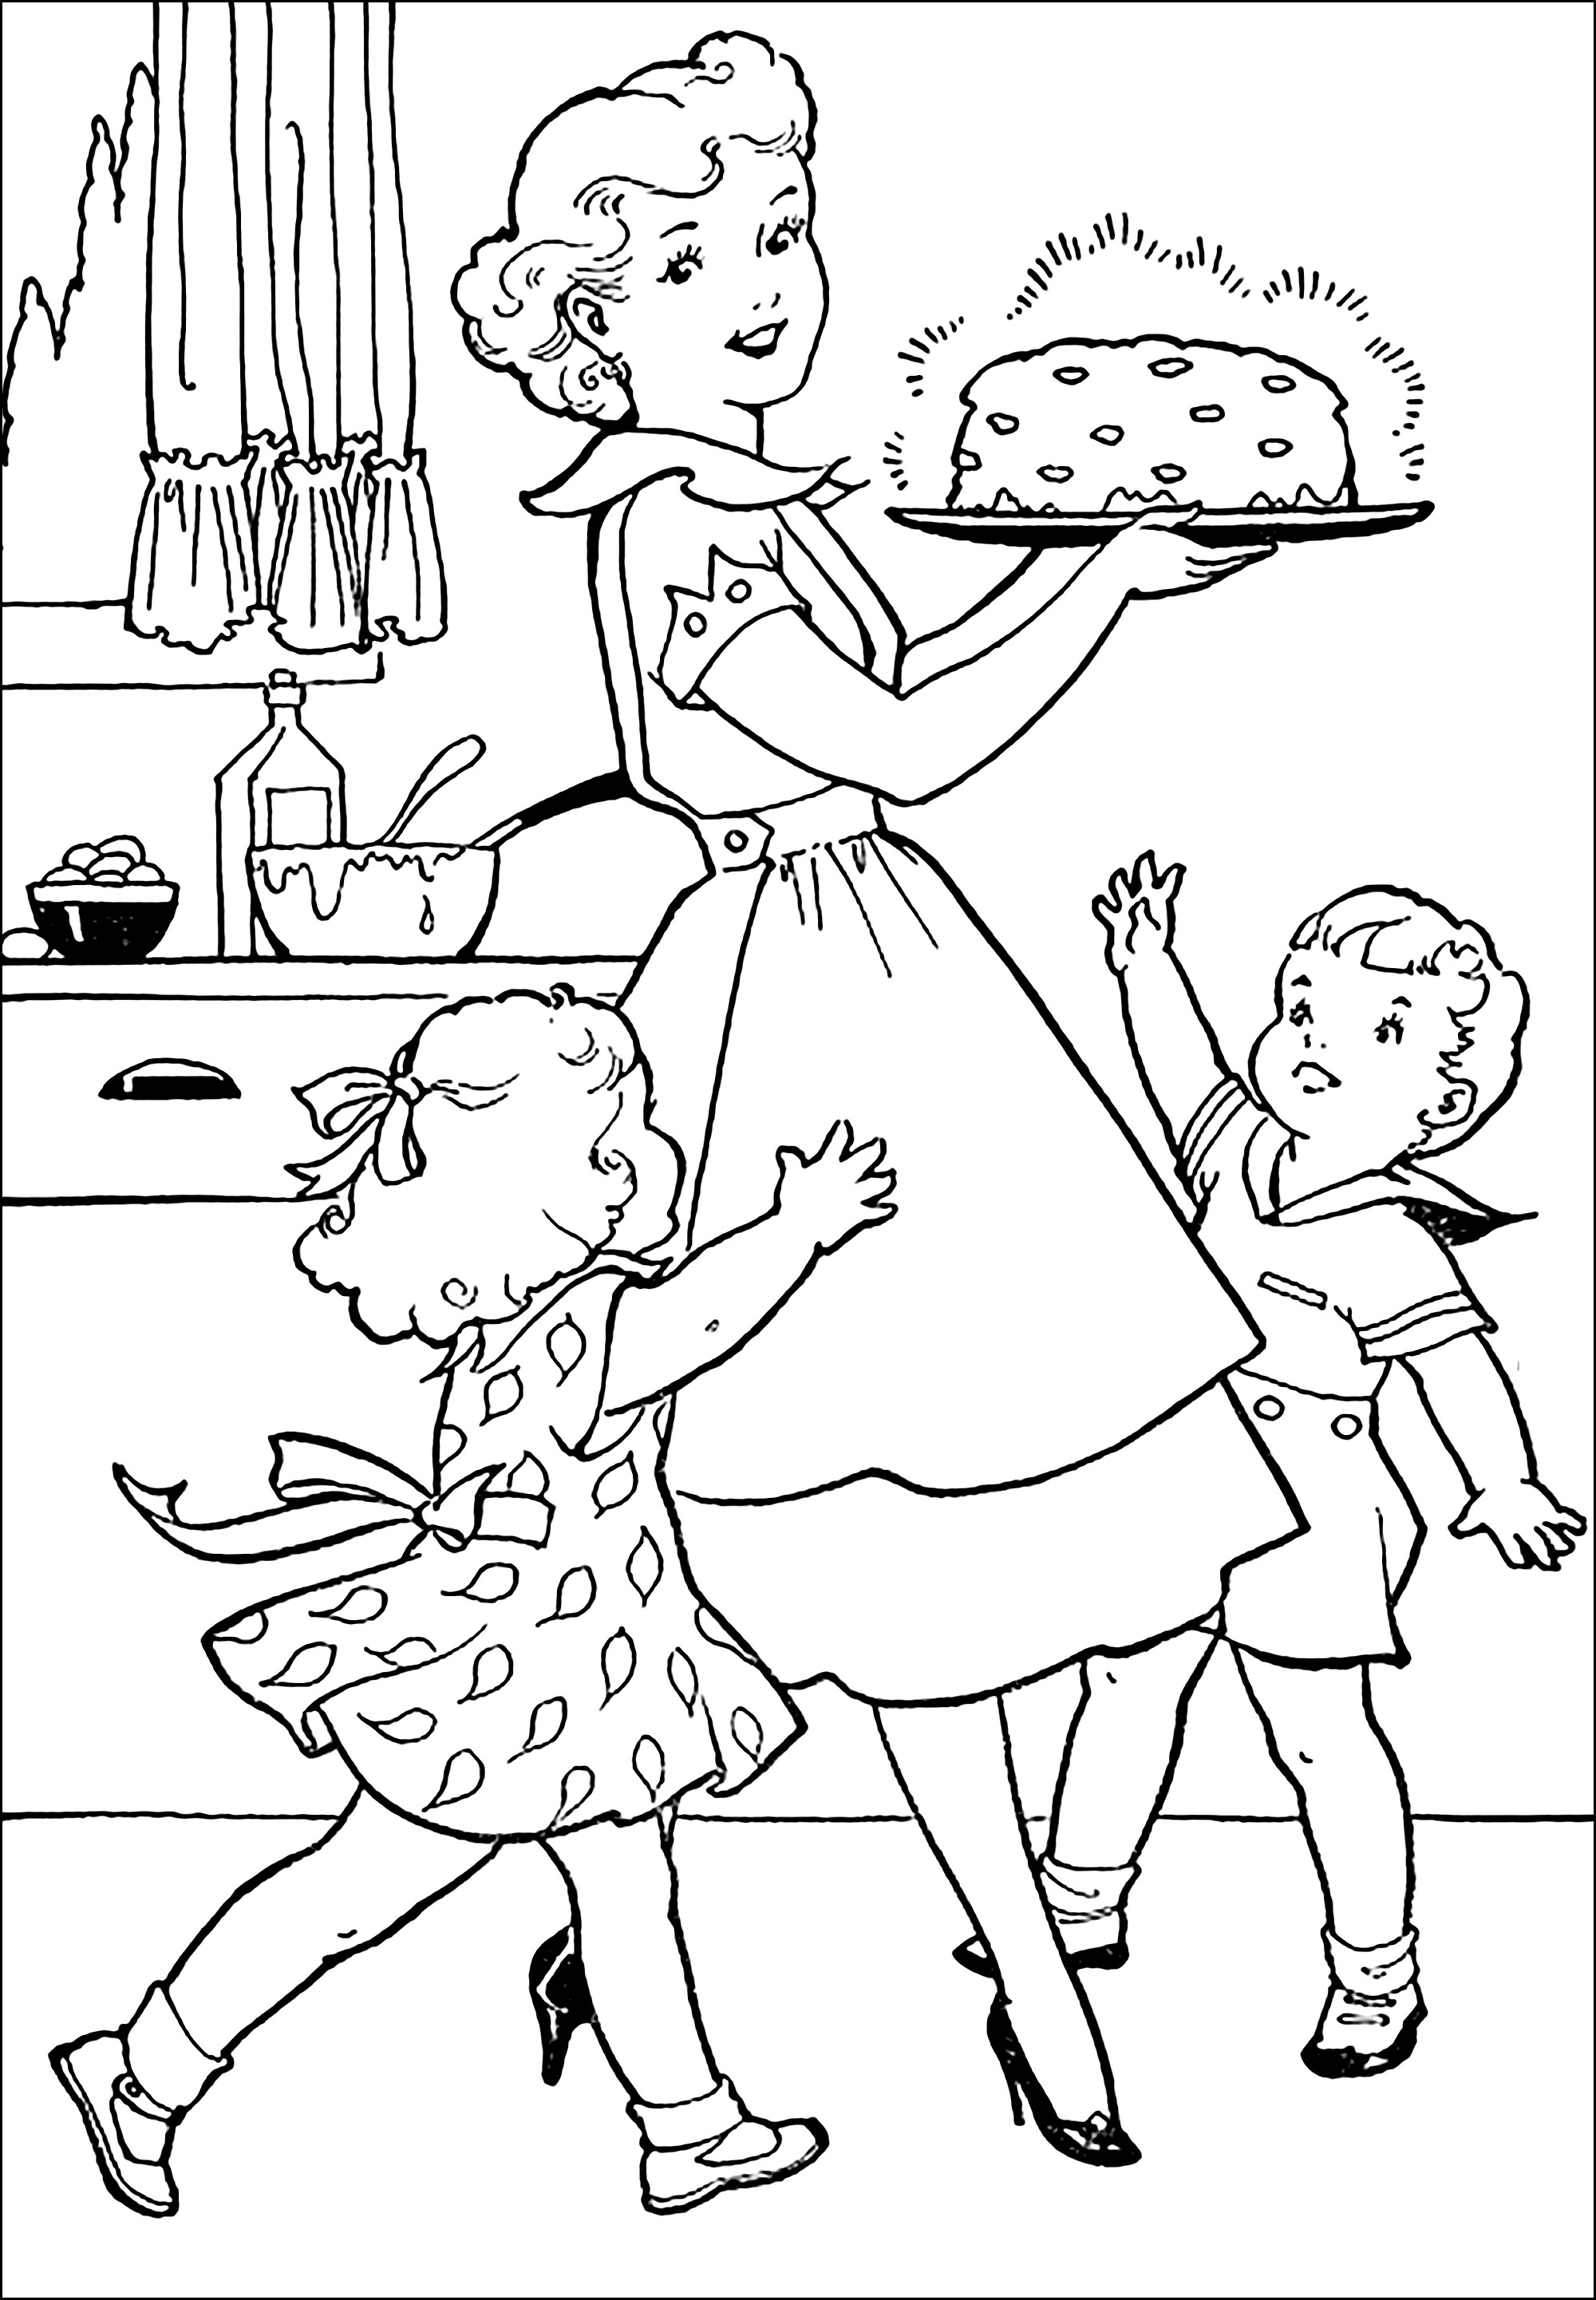 50's coloring of a mother preparing a cake for her children